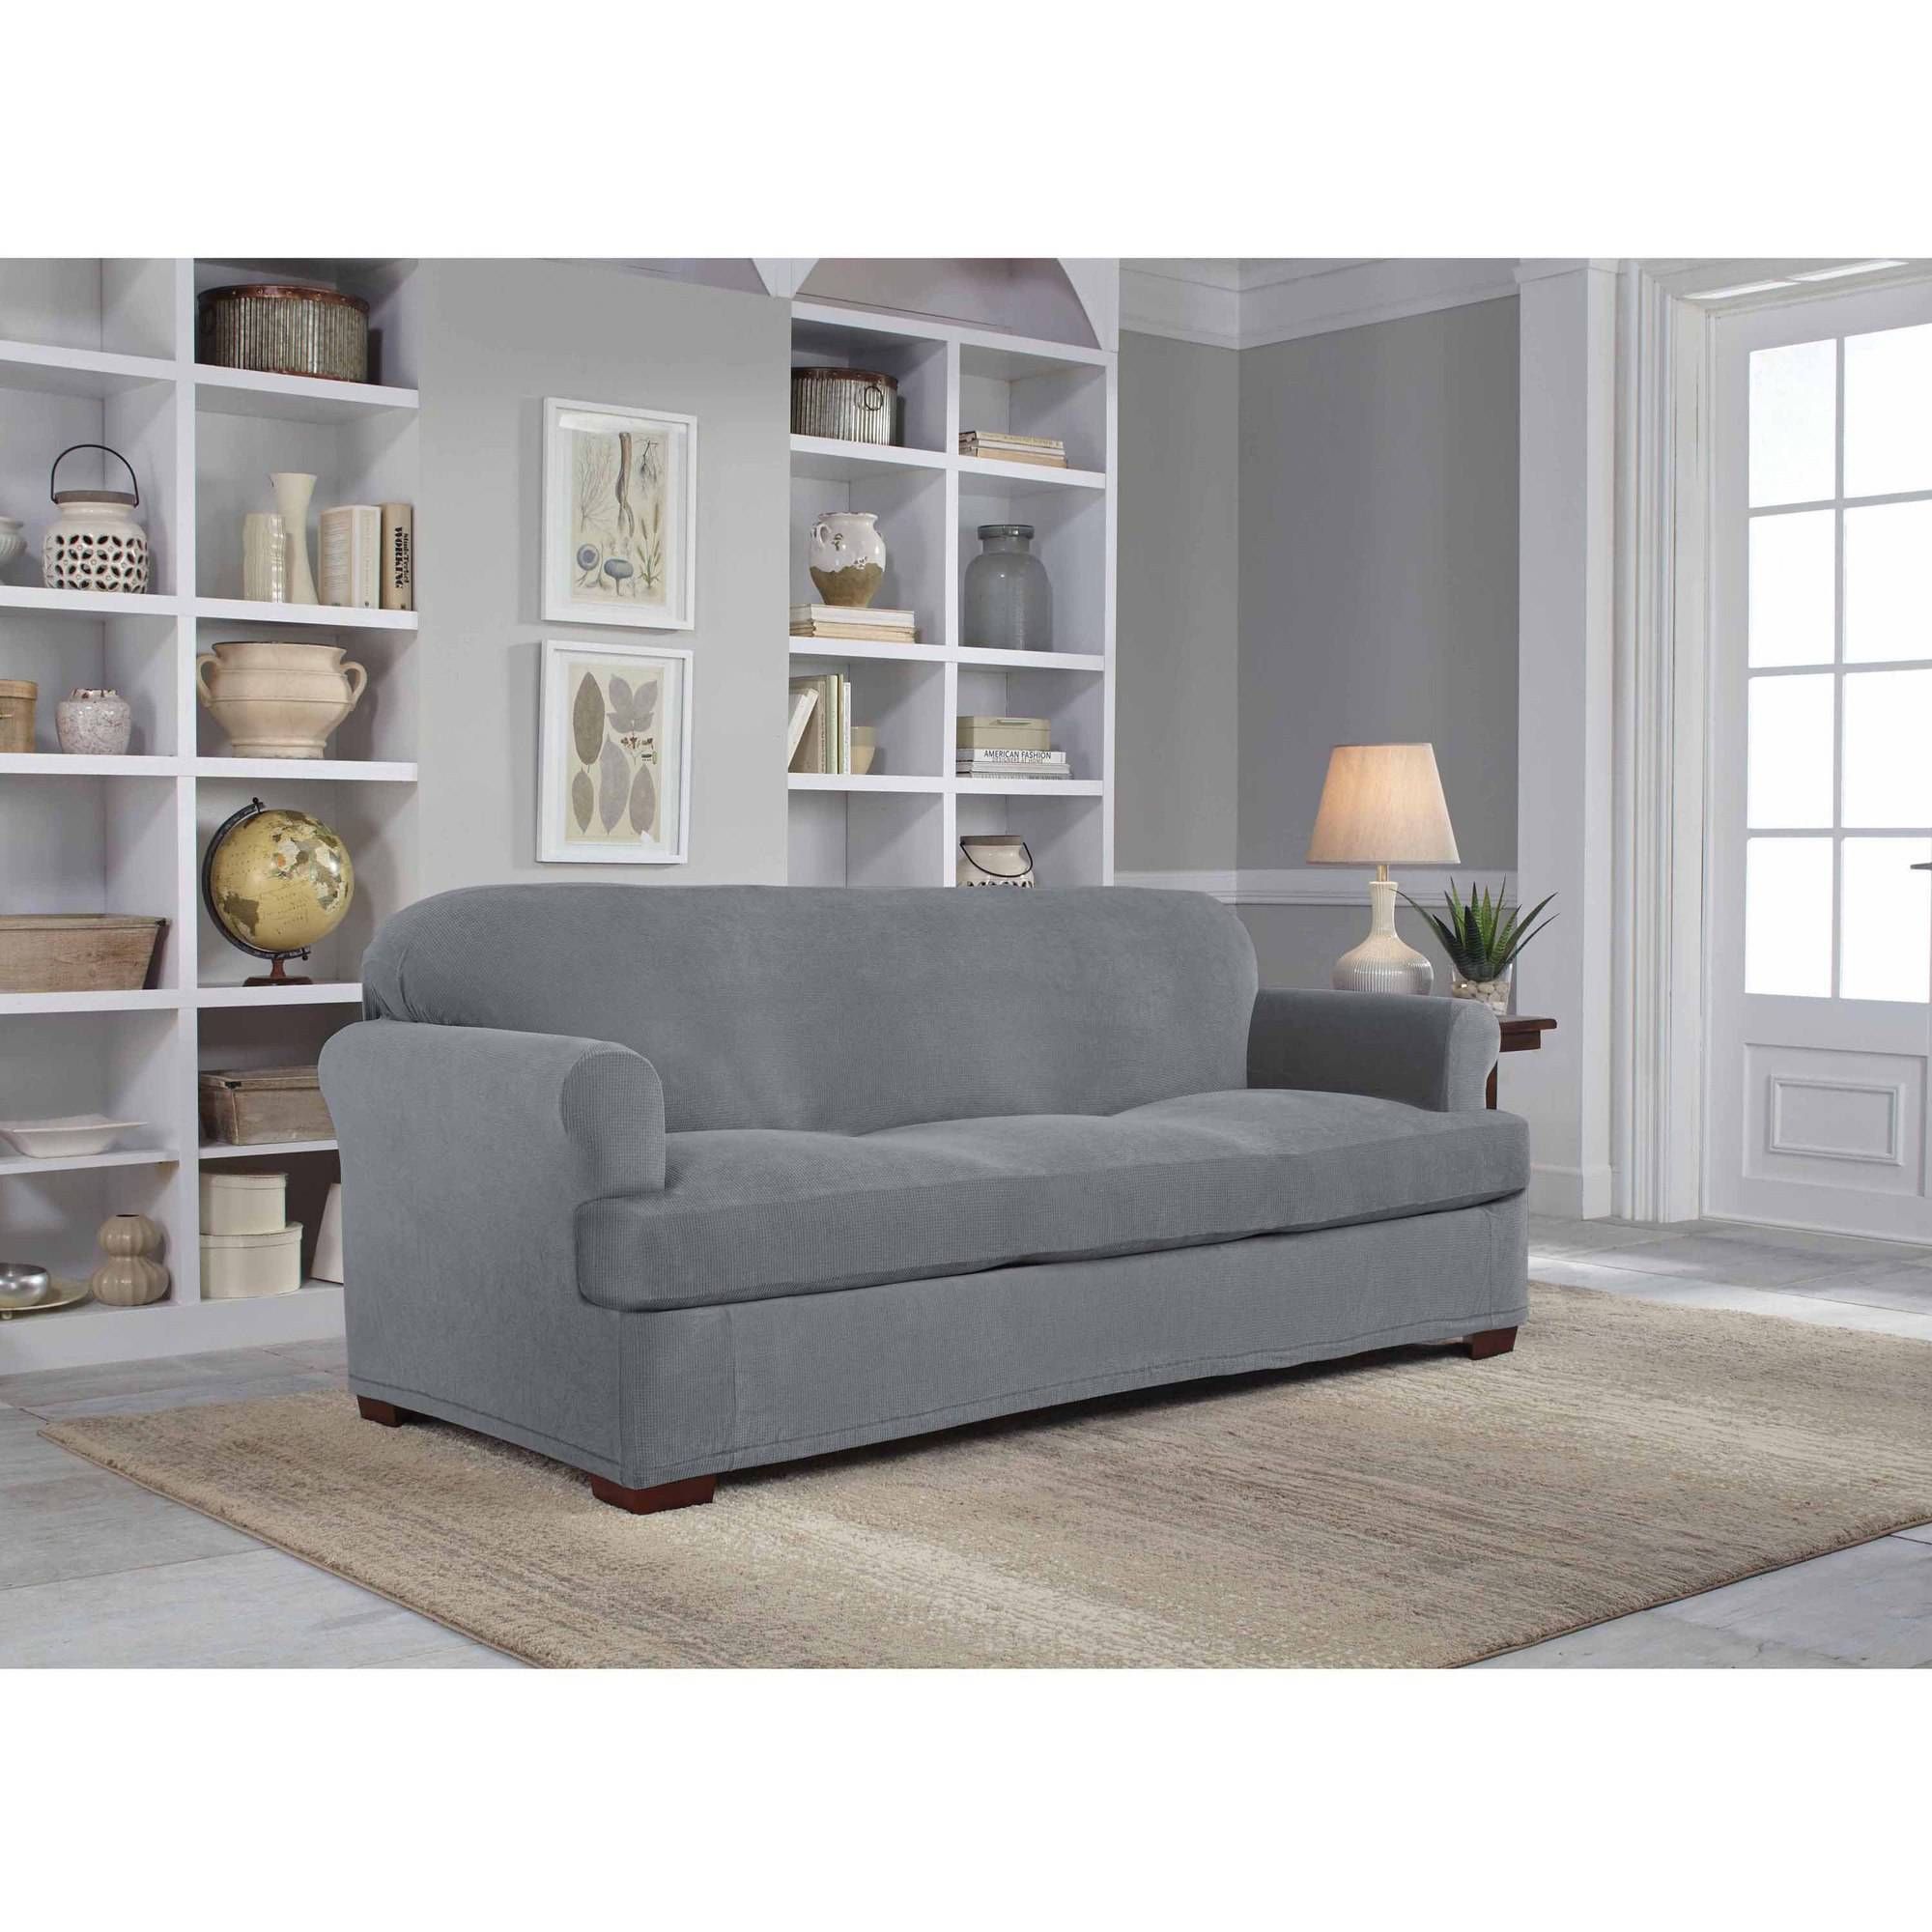 Serta Stretch Grid Slipcover, Sofa, 2 Piece T Cushion – Walmart Inside T Cushion Slipcovers For Large Sofas (View 3 of 15)